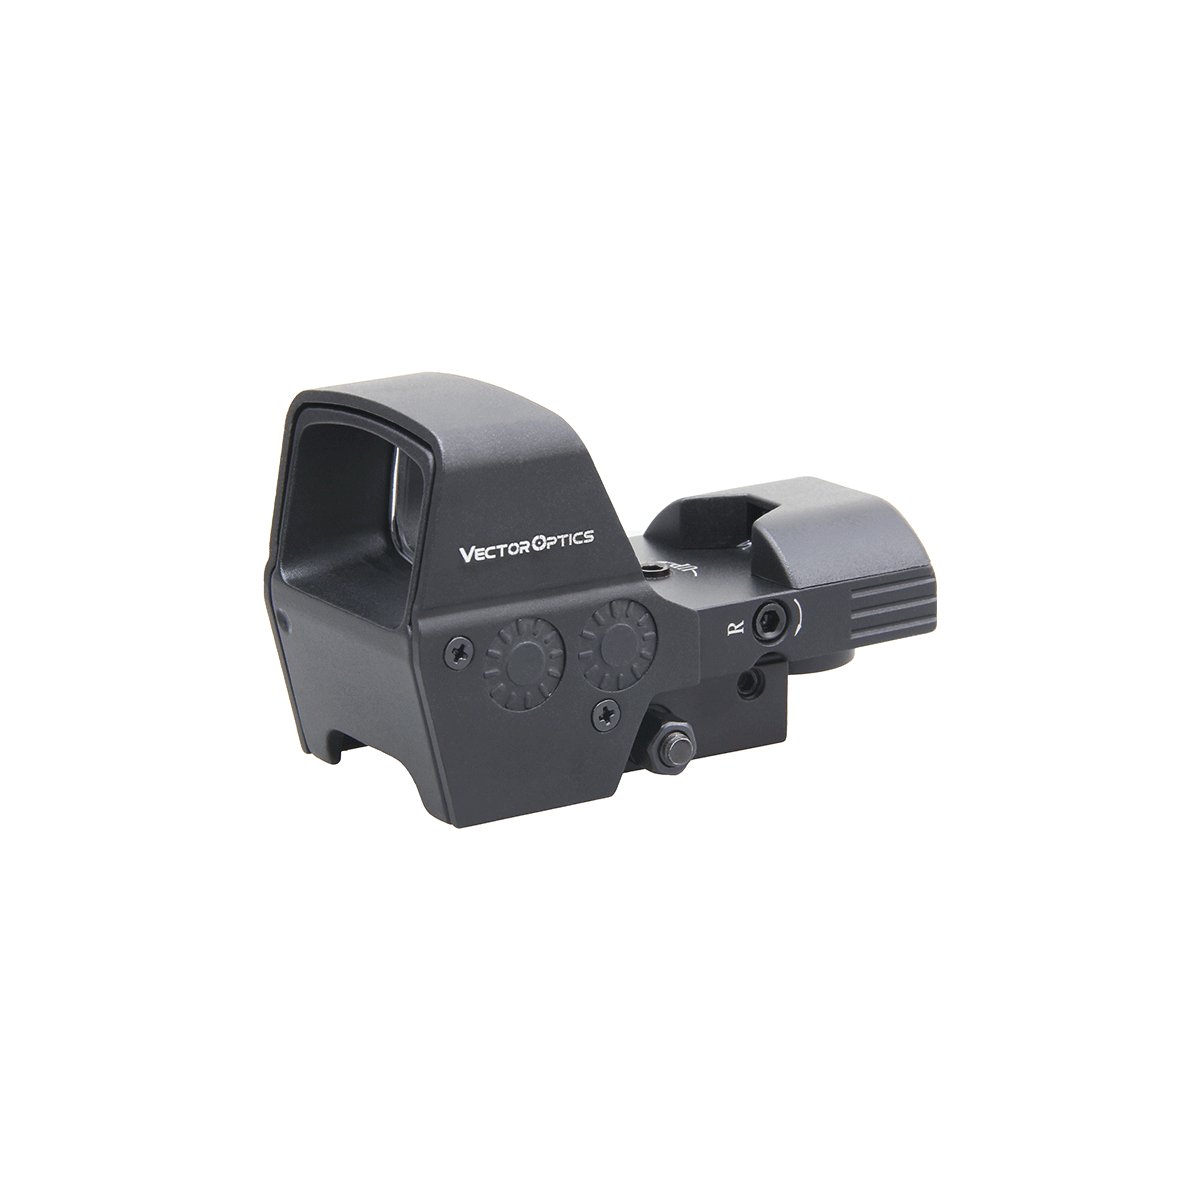 Four Reticle Budget Red Dot - Vector Optics US Online Store